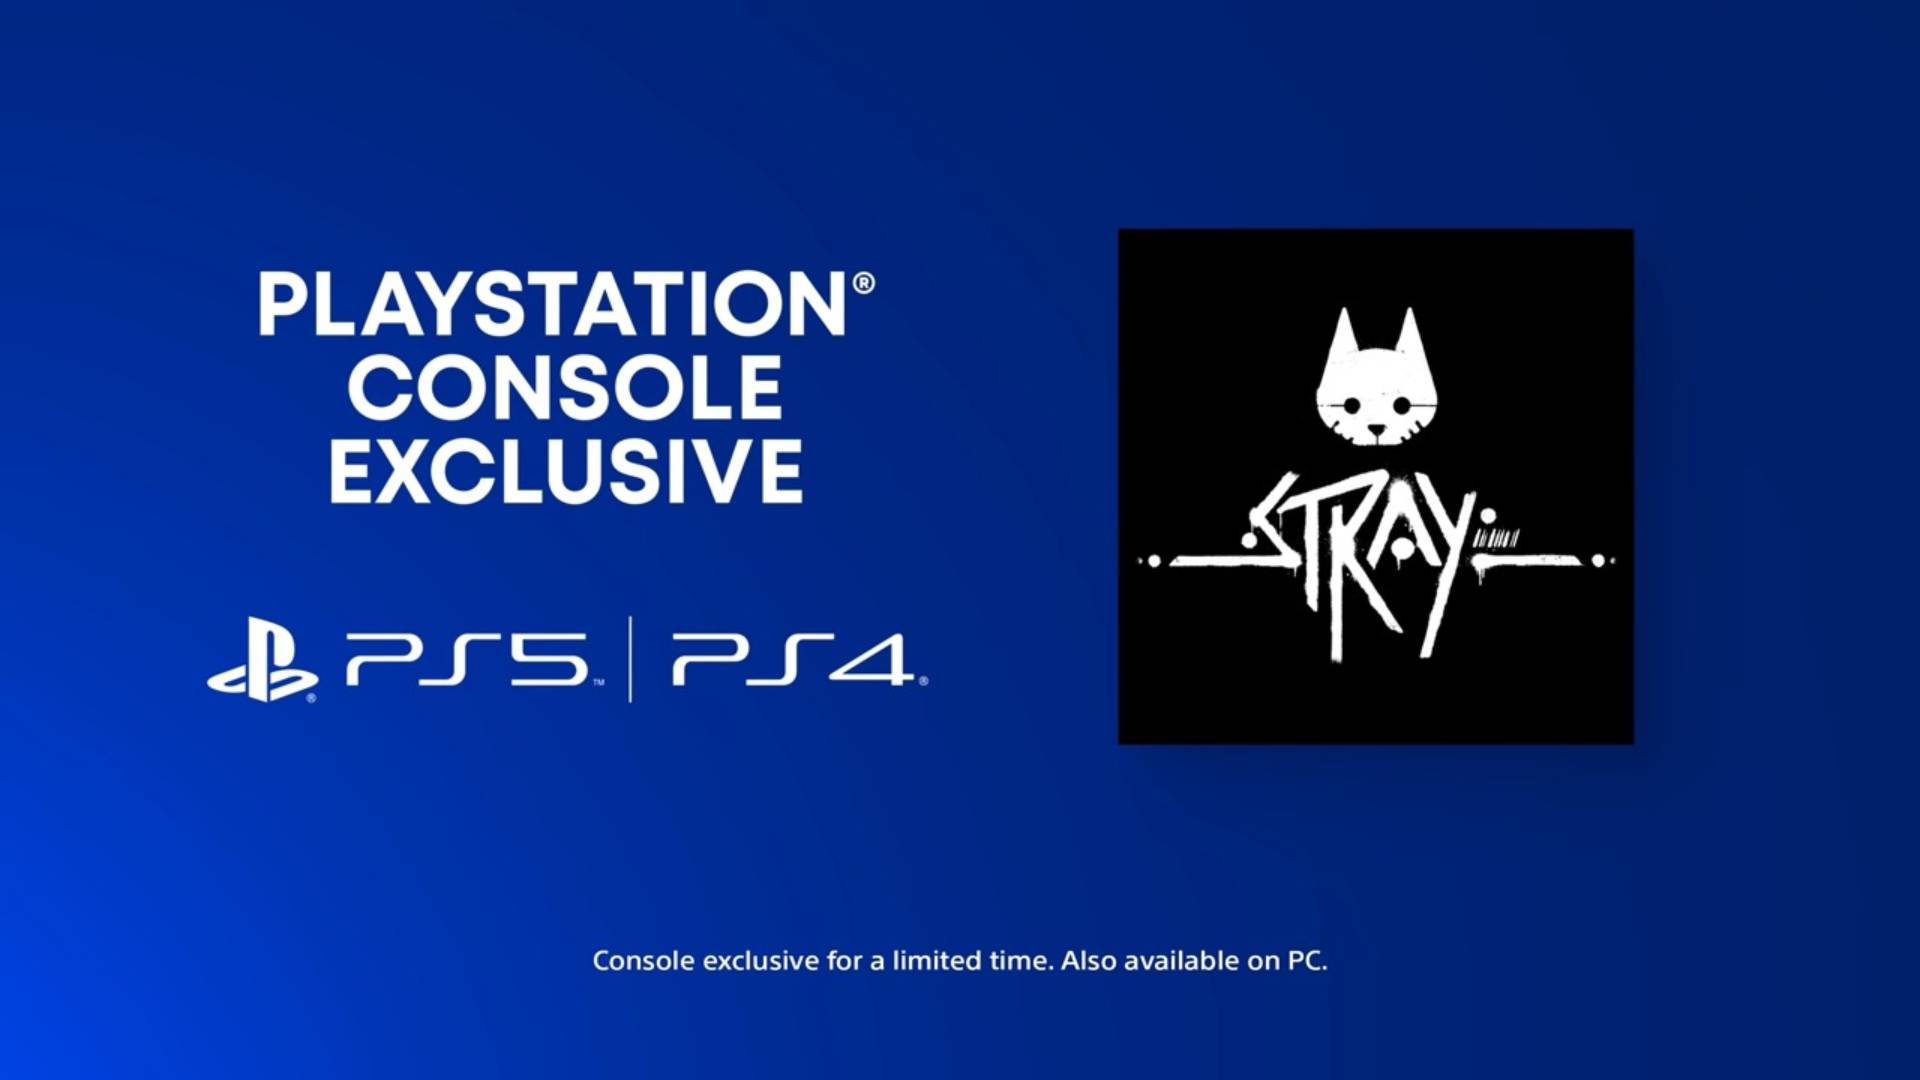 Stray on xbox or game pass